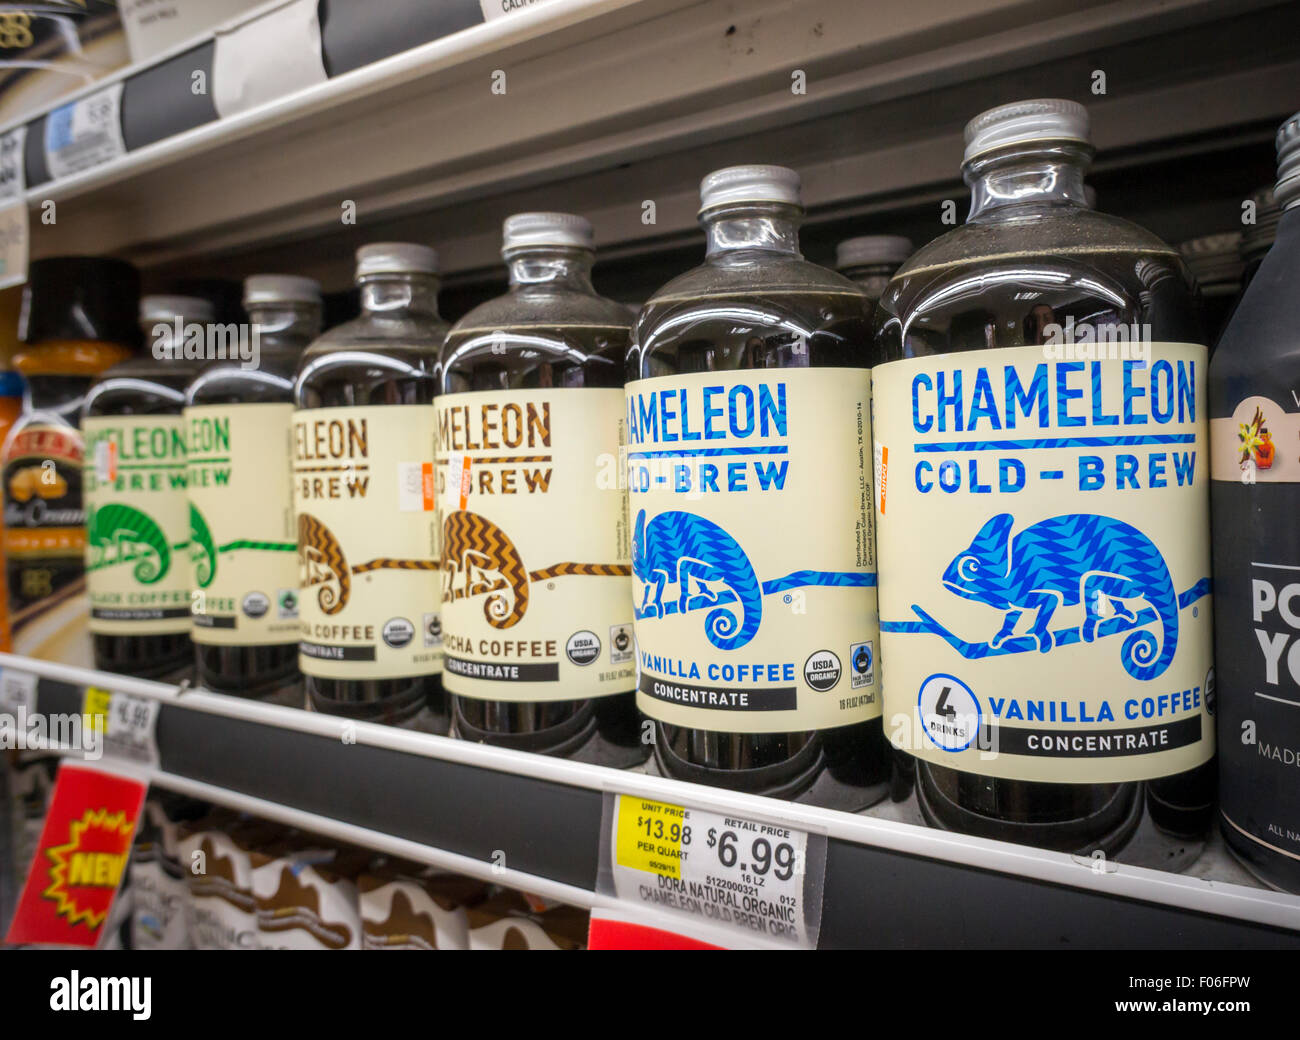 Bottles of Chameleon brand cold brewed coffee in a supermarket cooler in New York on Monday, August 3, 2015. As cold brewed coffee moves away from its hipster roots into the mainstream it is being offered by more and more coffee chains. It can also boost summer coffee sales, traditionally coffee drinking falls off in the hot months.  (© Richard B. Levine) Stock Photo